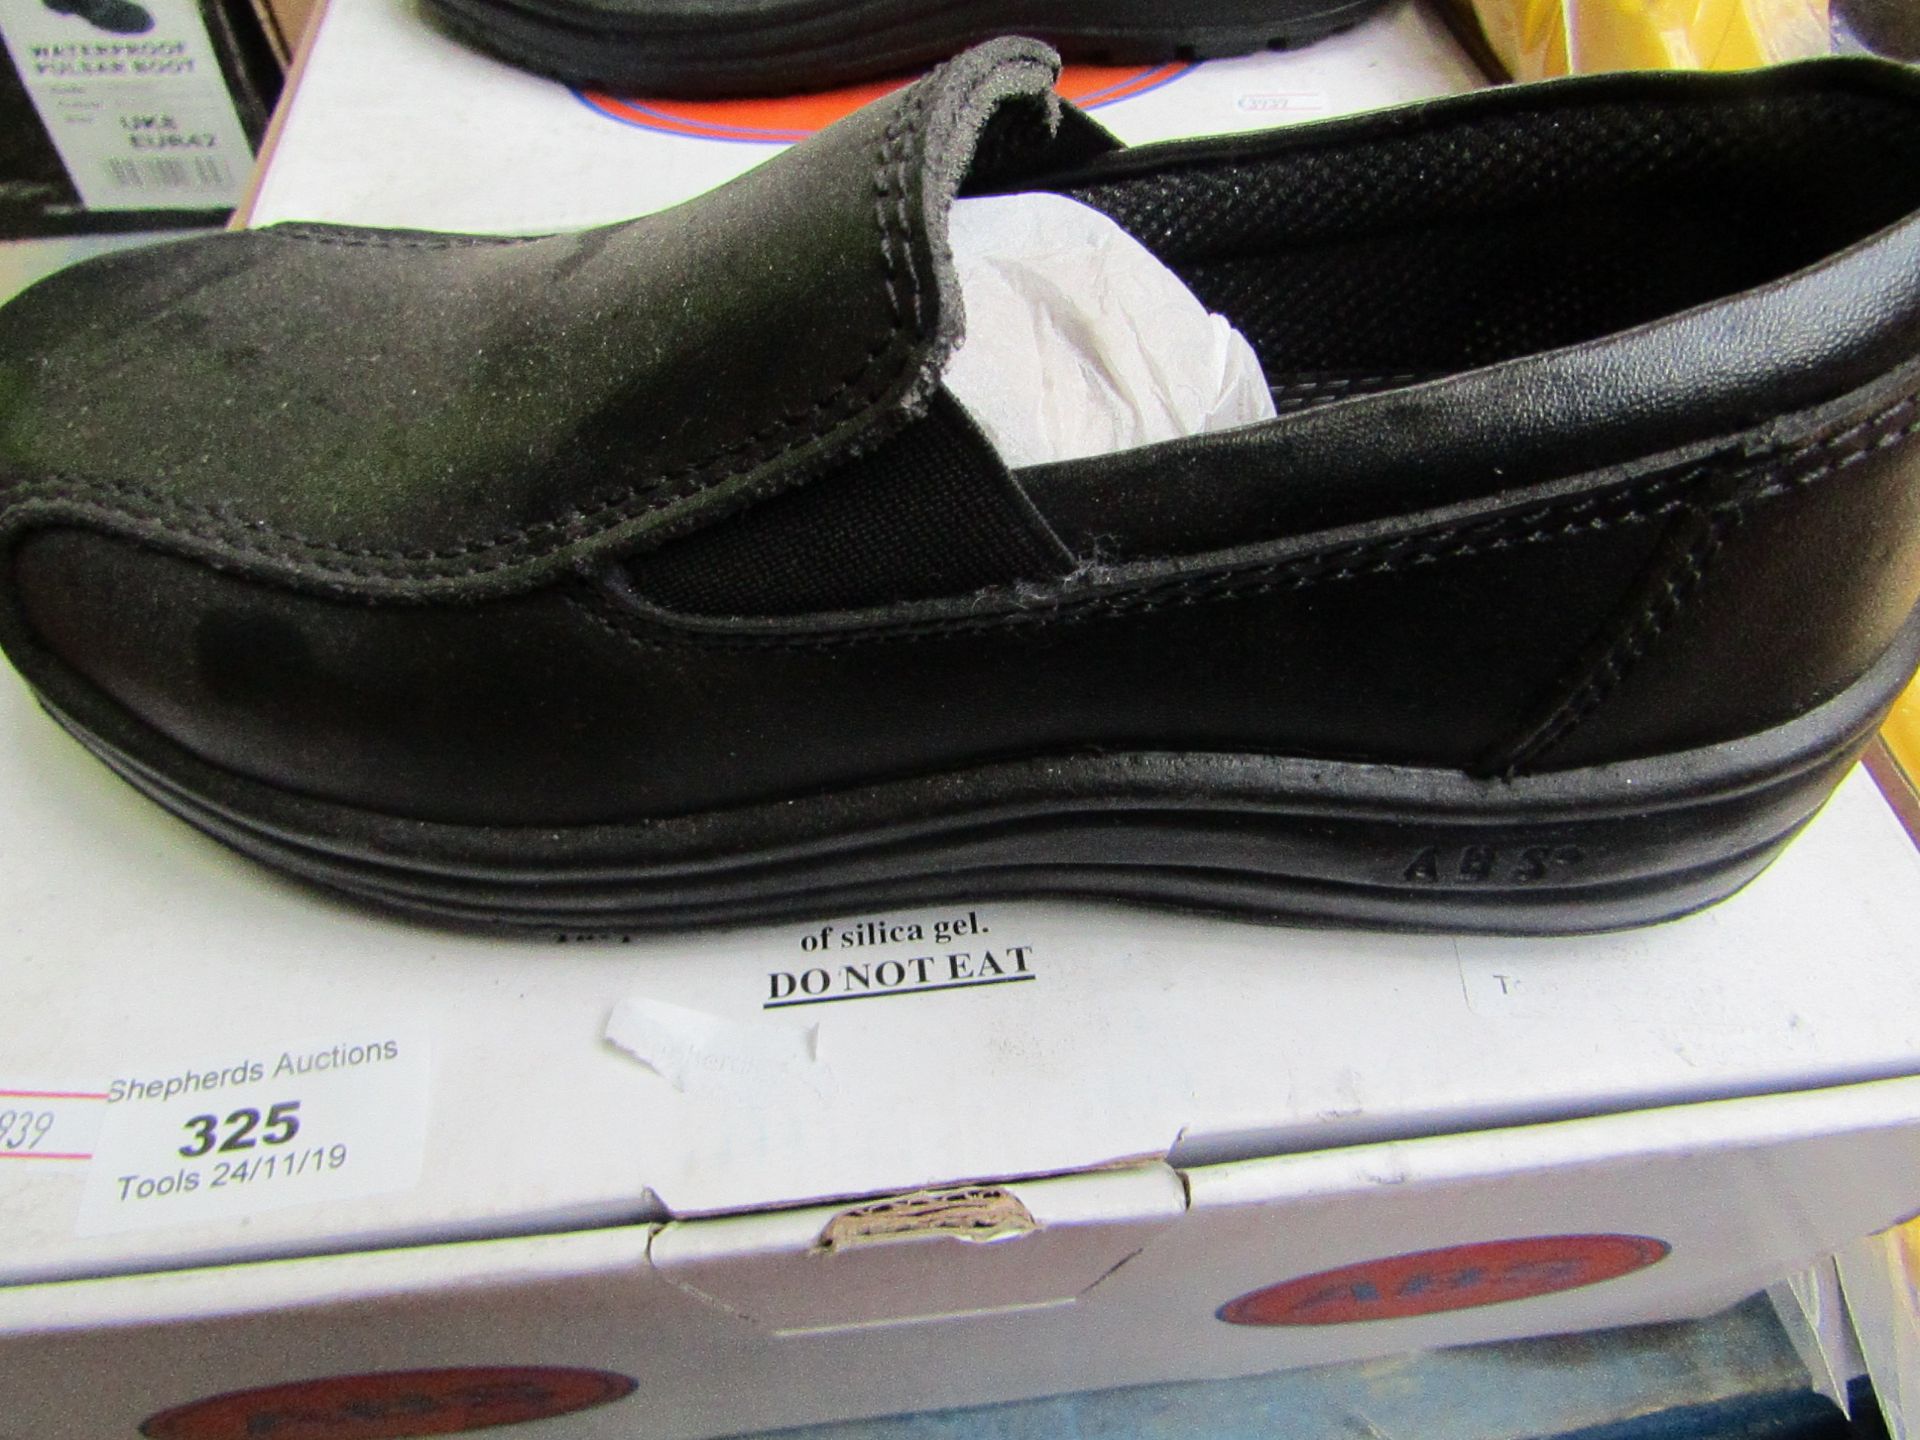 ABS Slip on steel toe cap safety shoes, new size 3